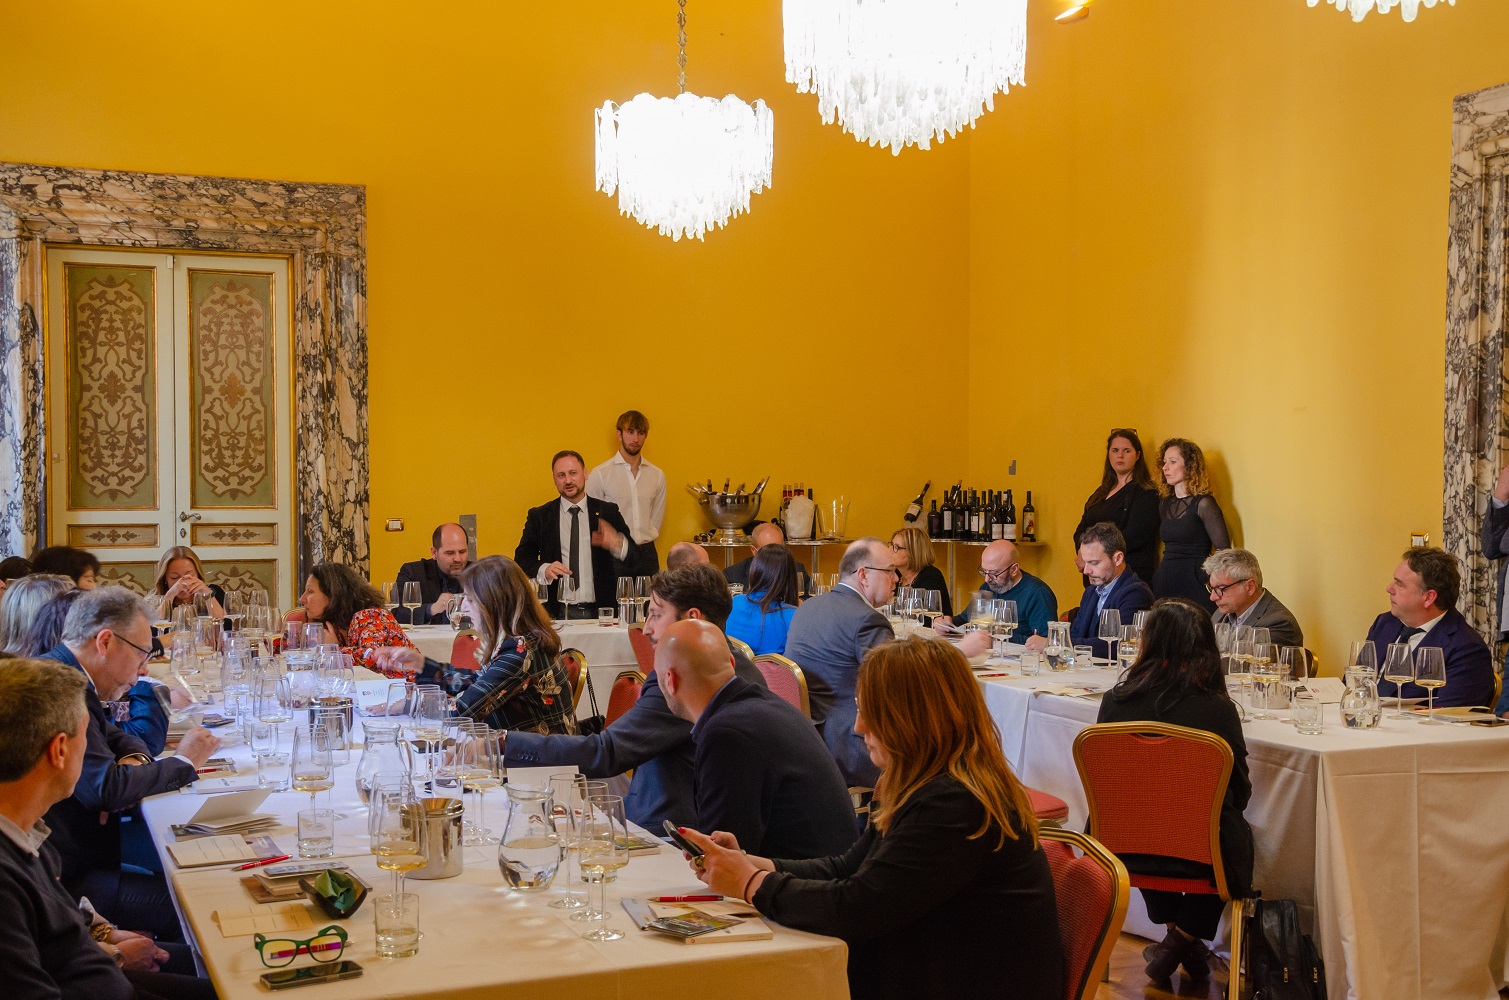 Successful wine promotion event in Rome